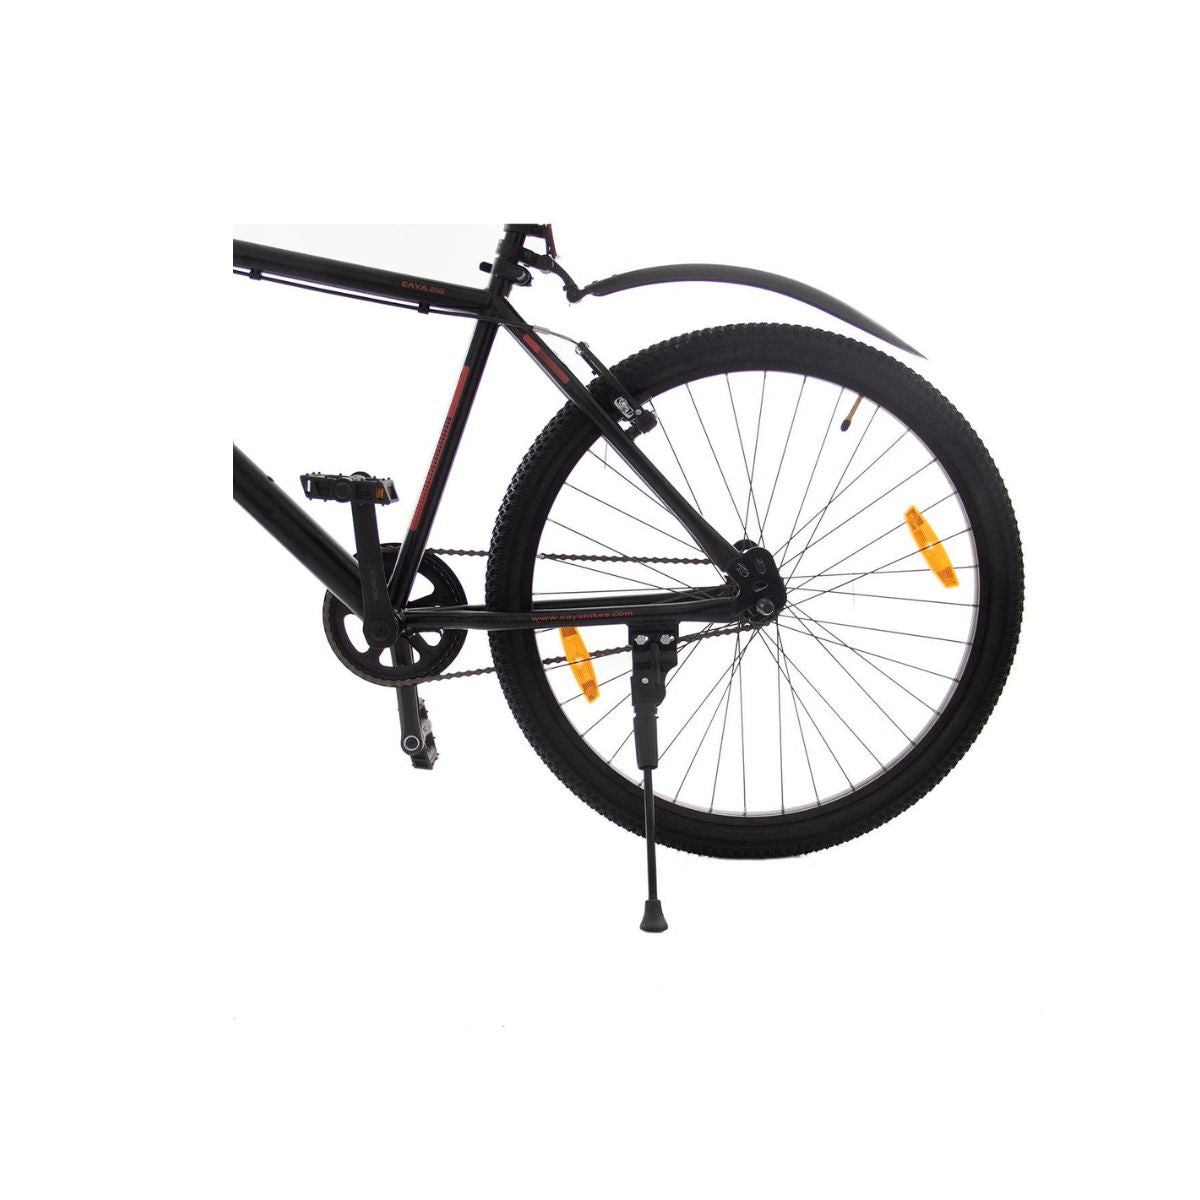 CAYA Carbon 26 Single Speed Cycle